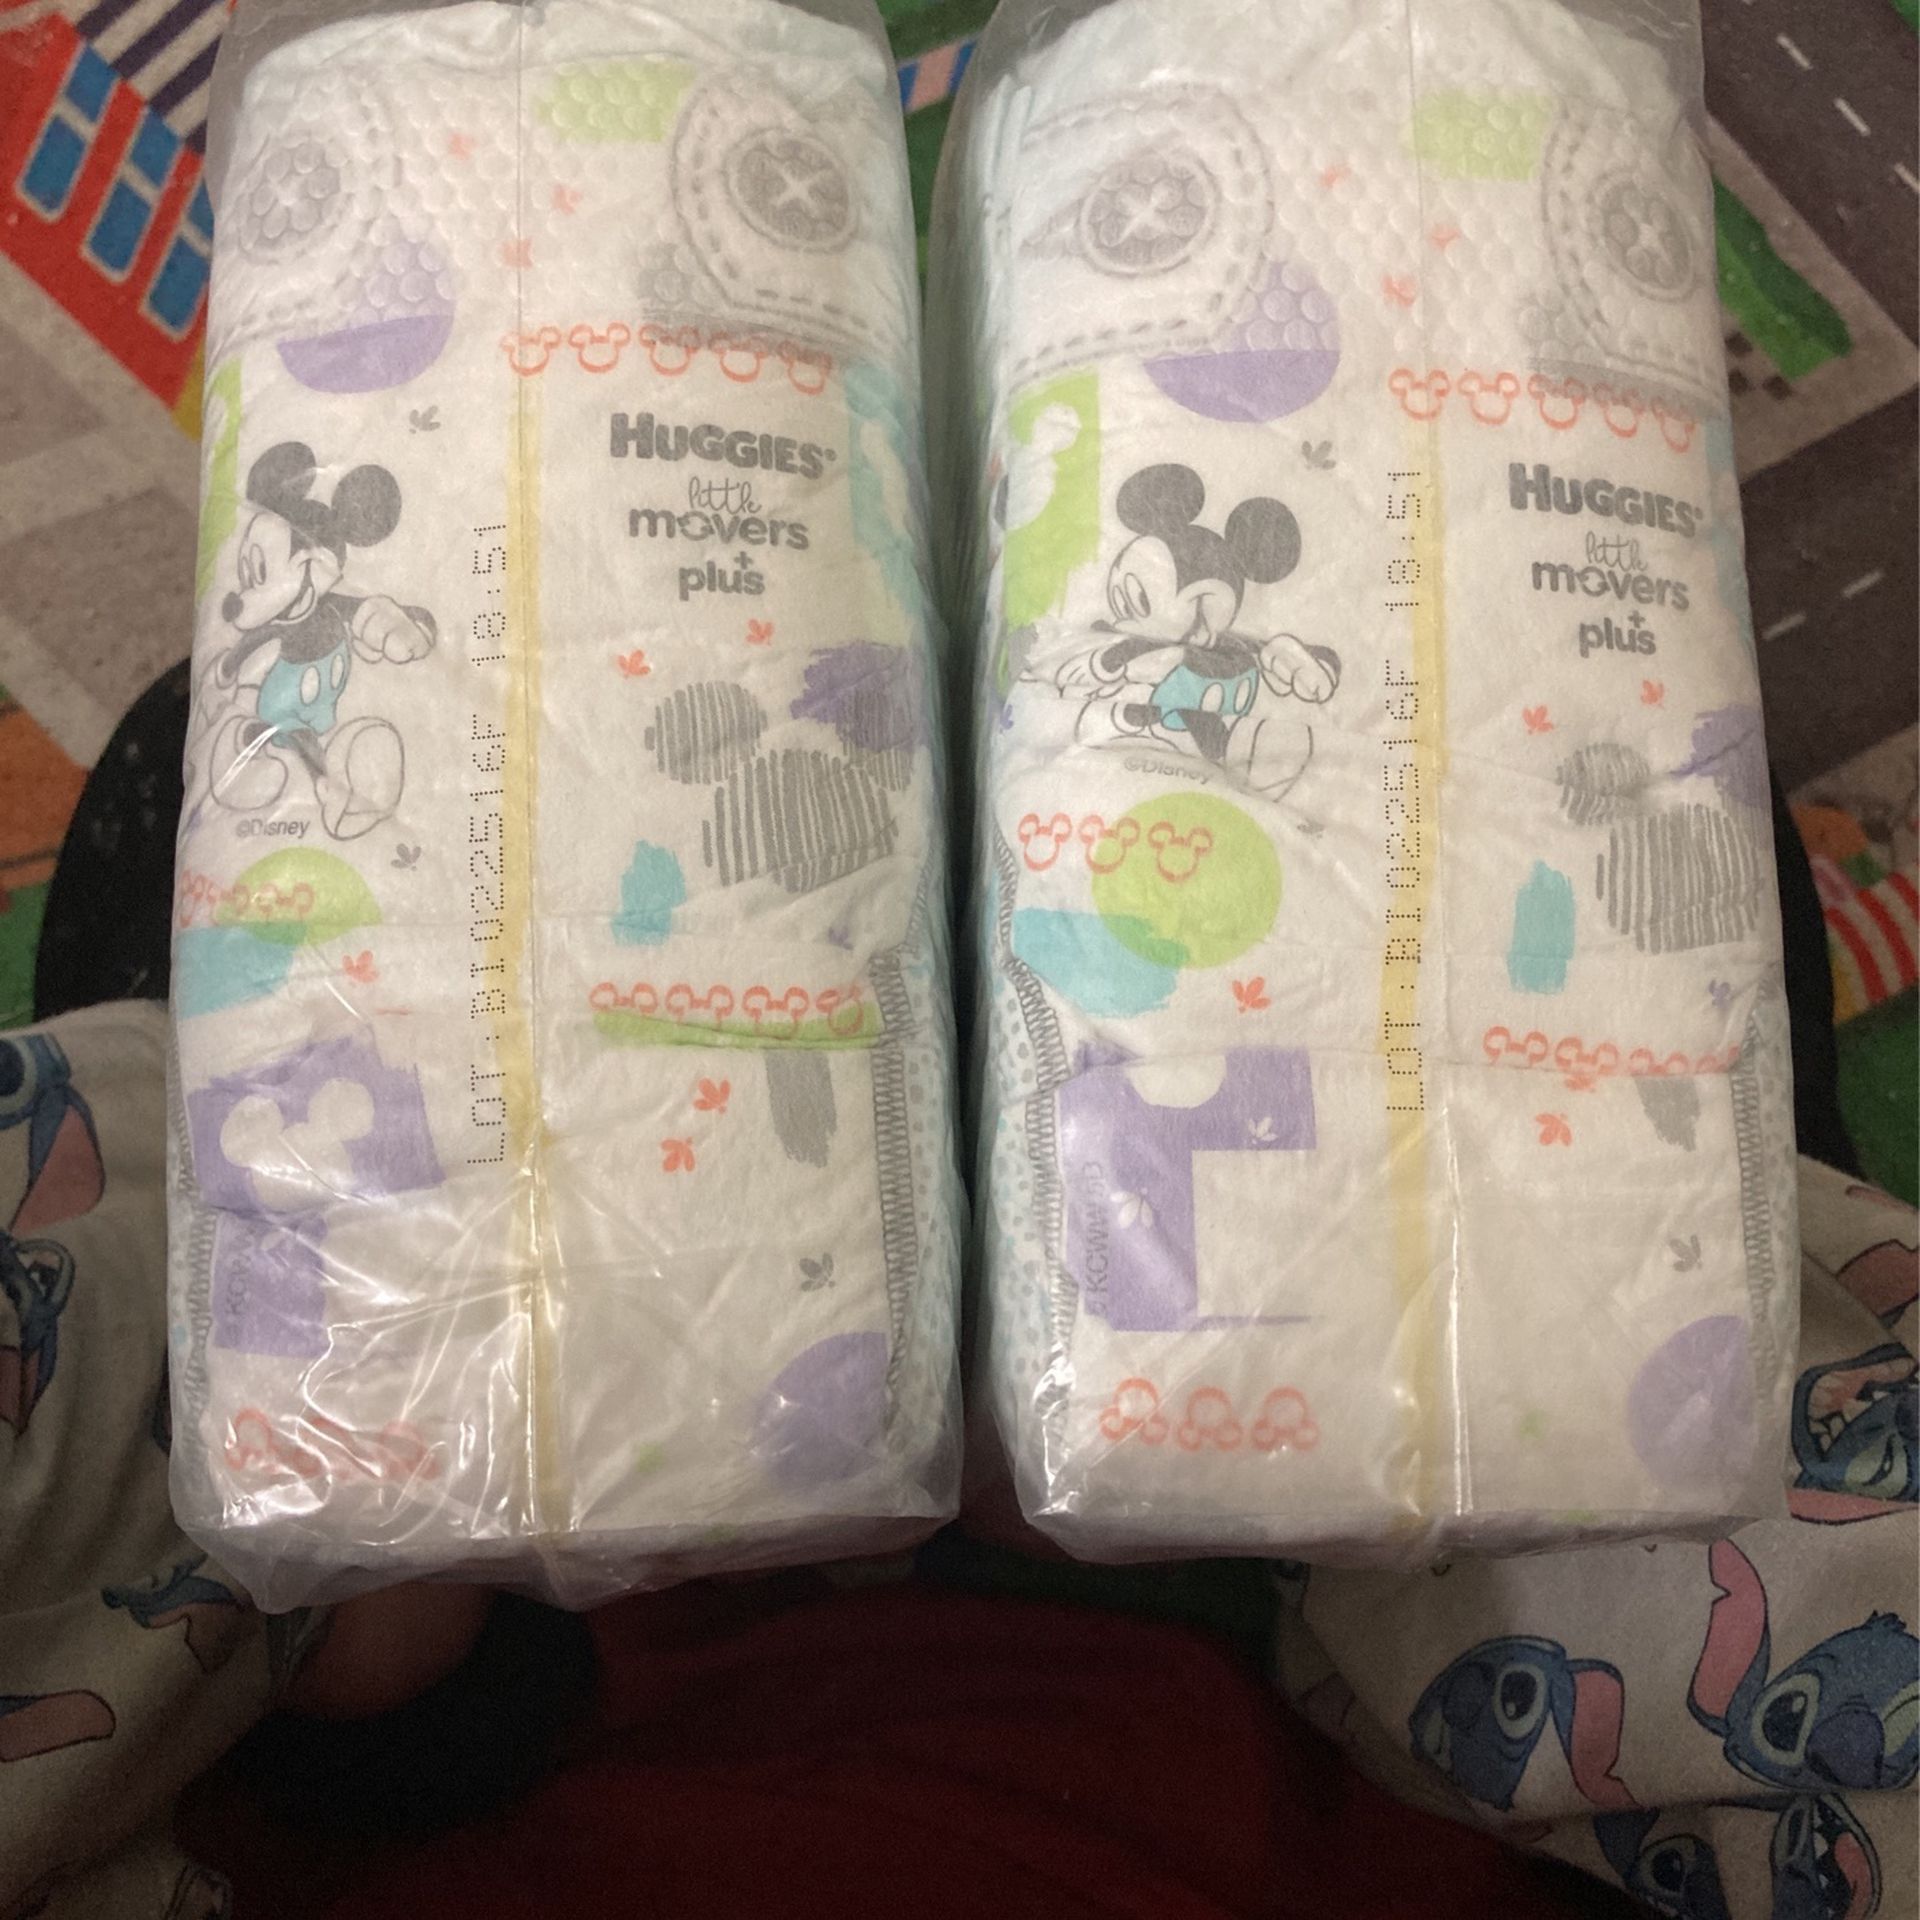 Huggies Little Movers Plus, Size 5